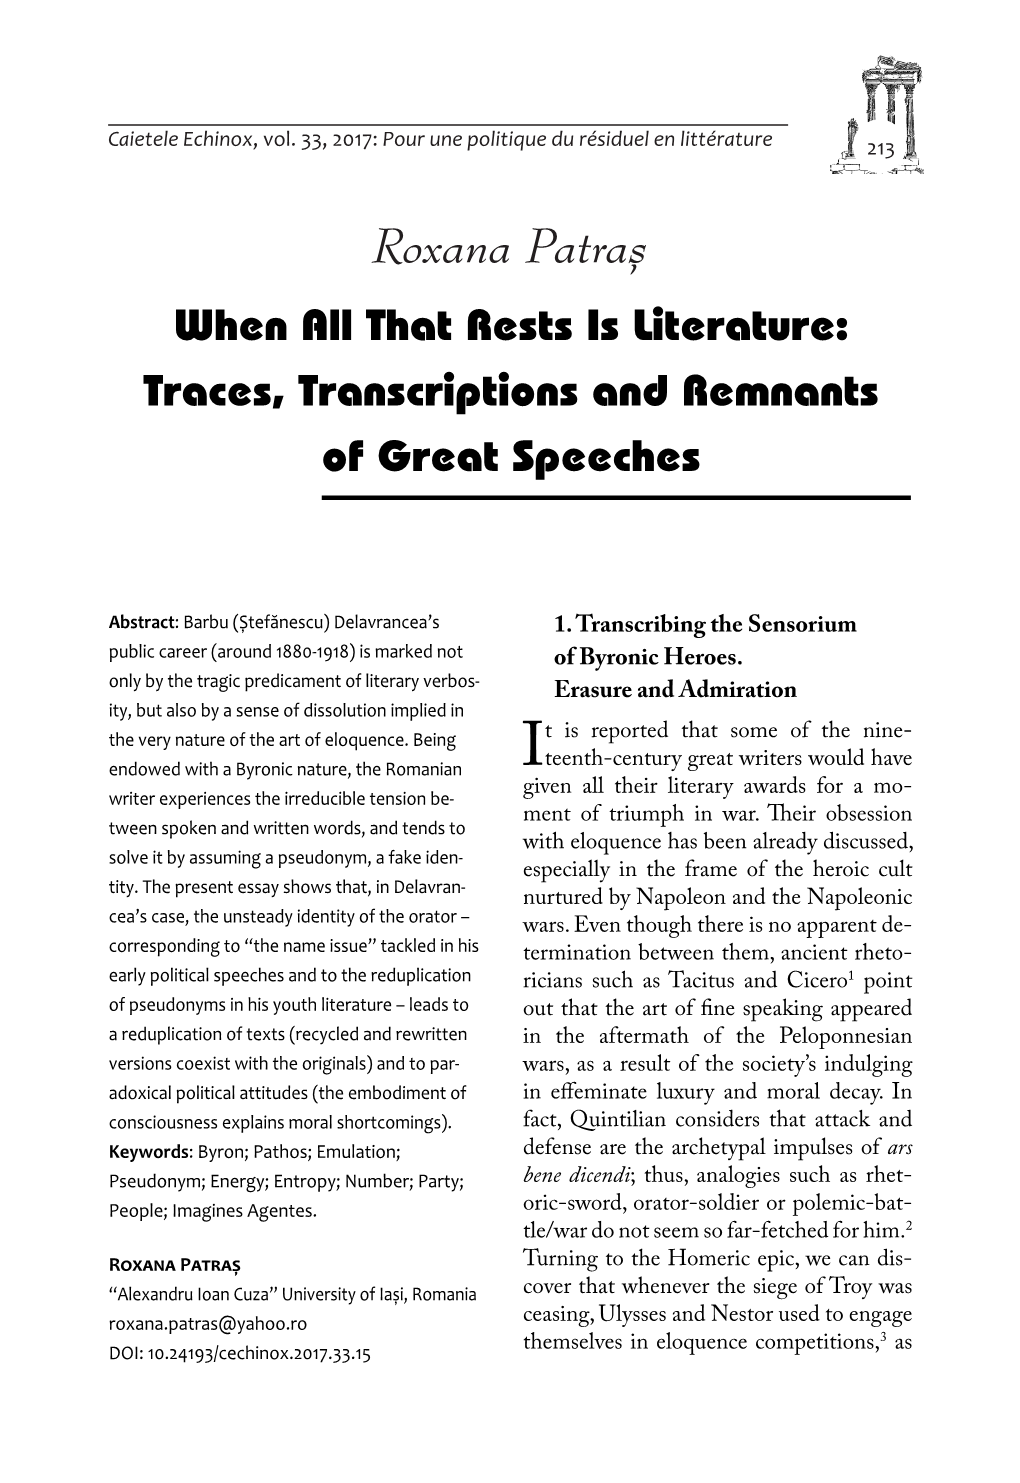 Roxana Patra[ When All That Rests Is Literature: Traces, Transcriptions and Remnants of Great Speeches